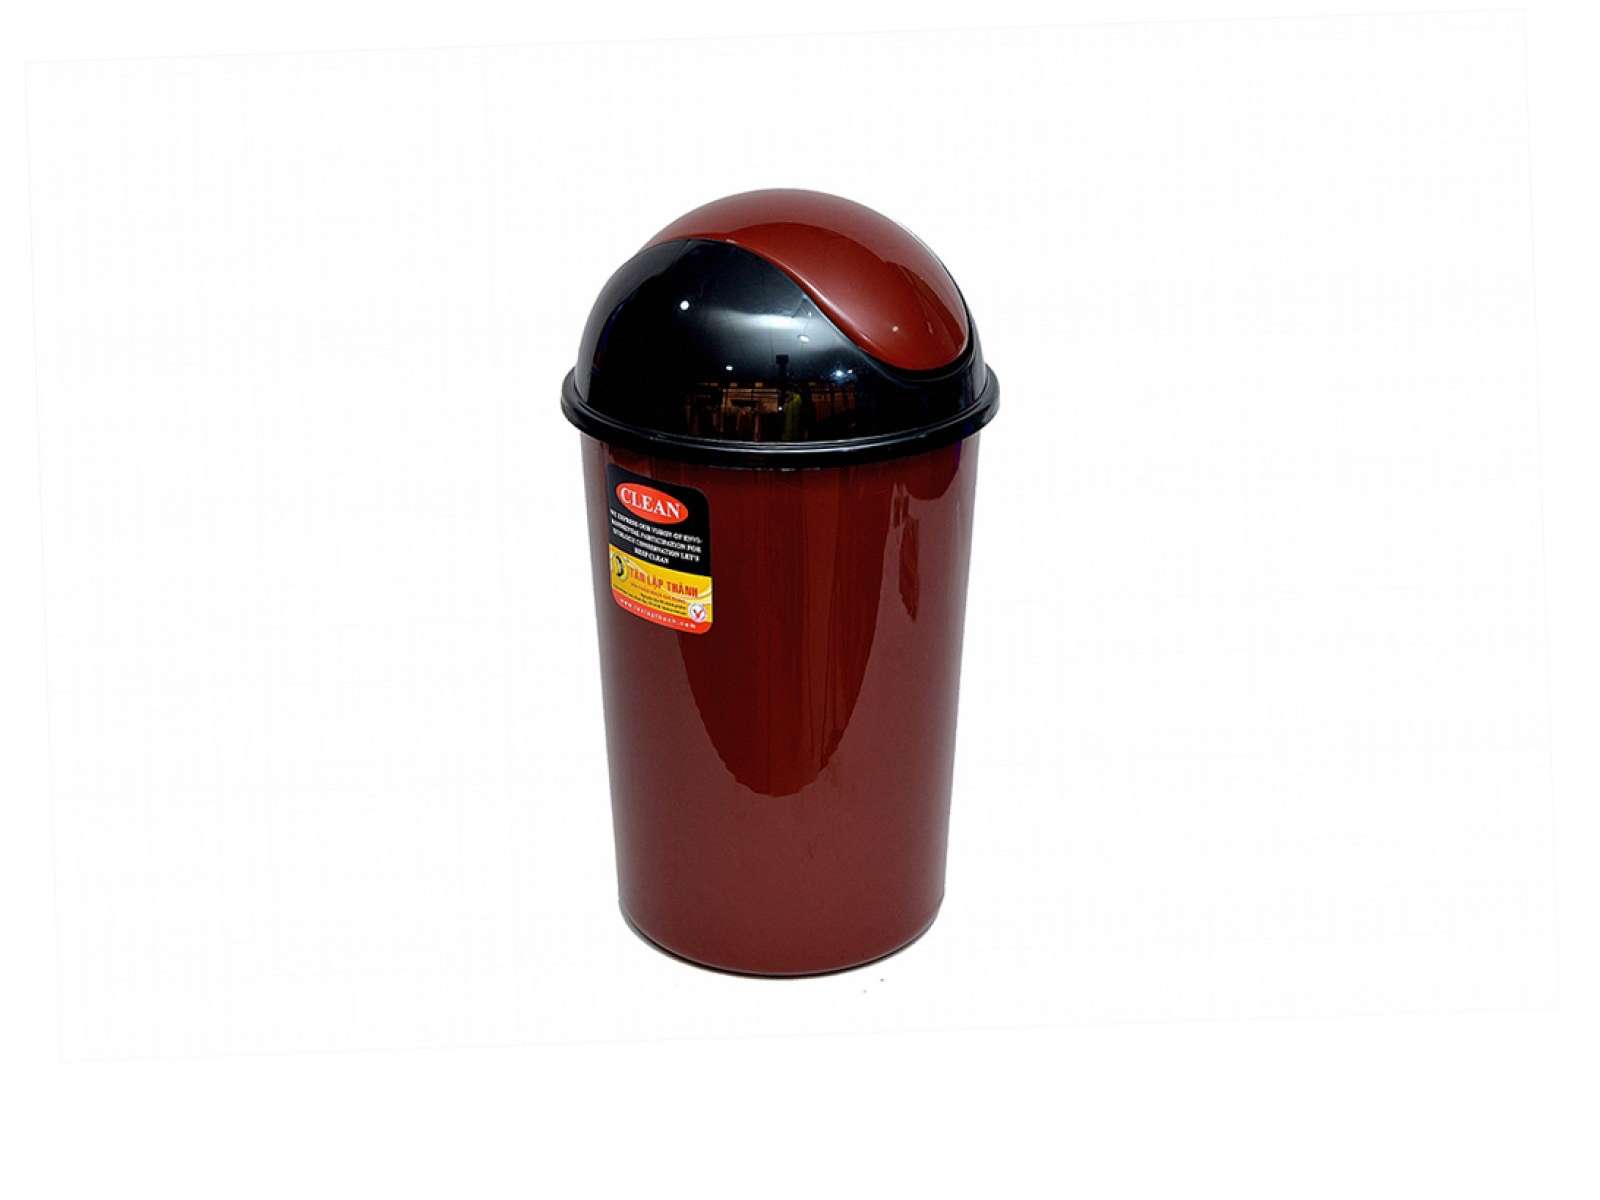 Round Waste Bin with swing lid